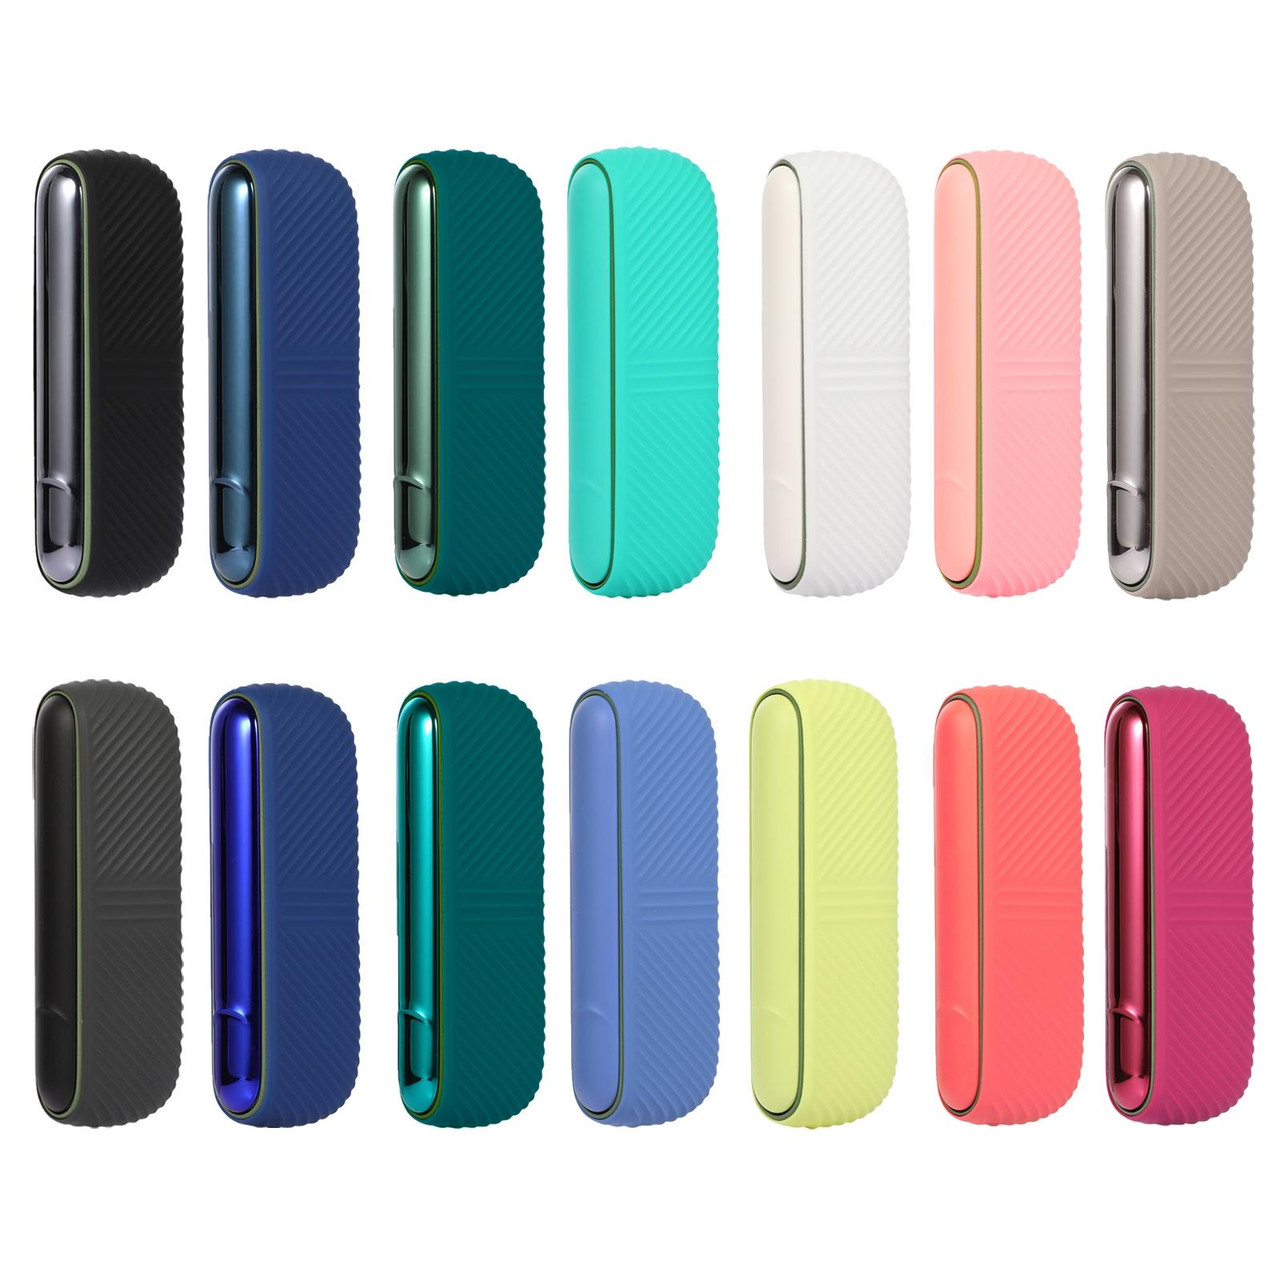 7 Colors pattern Case for iqos 3.0 Case + Side Cover Holder Box for iqos 3  duo Protective Shell Accessories